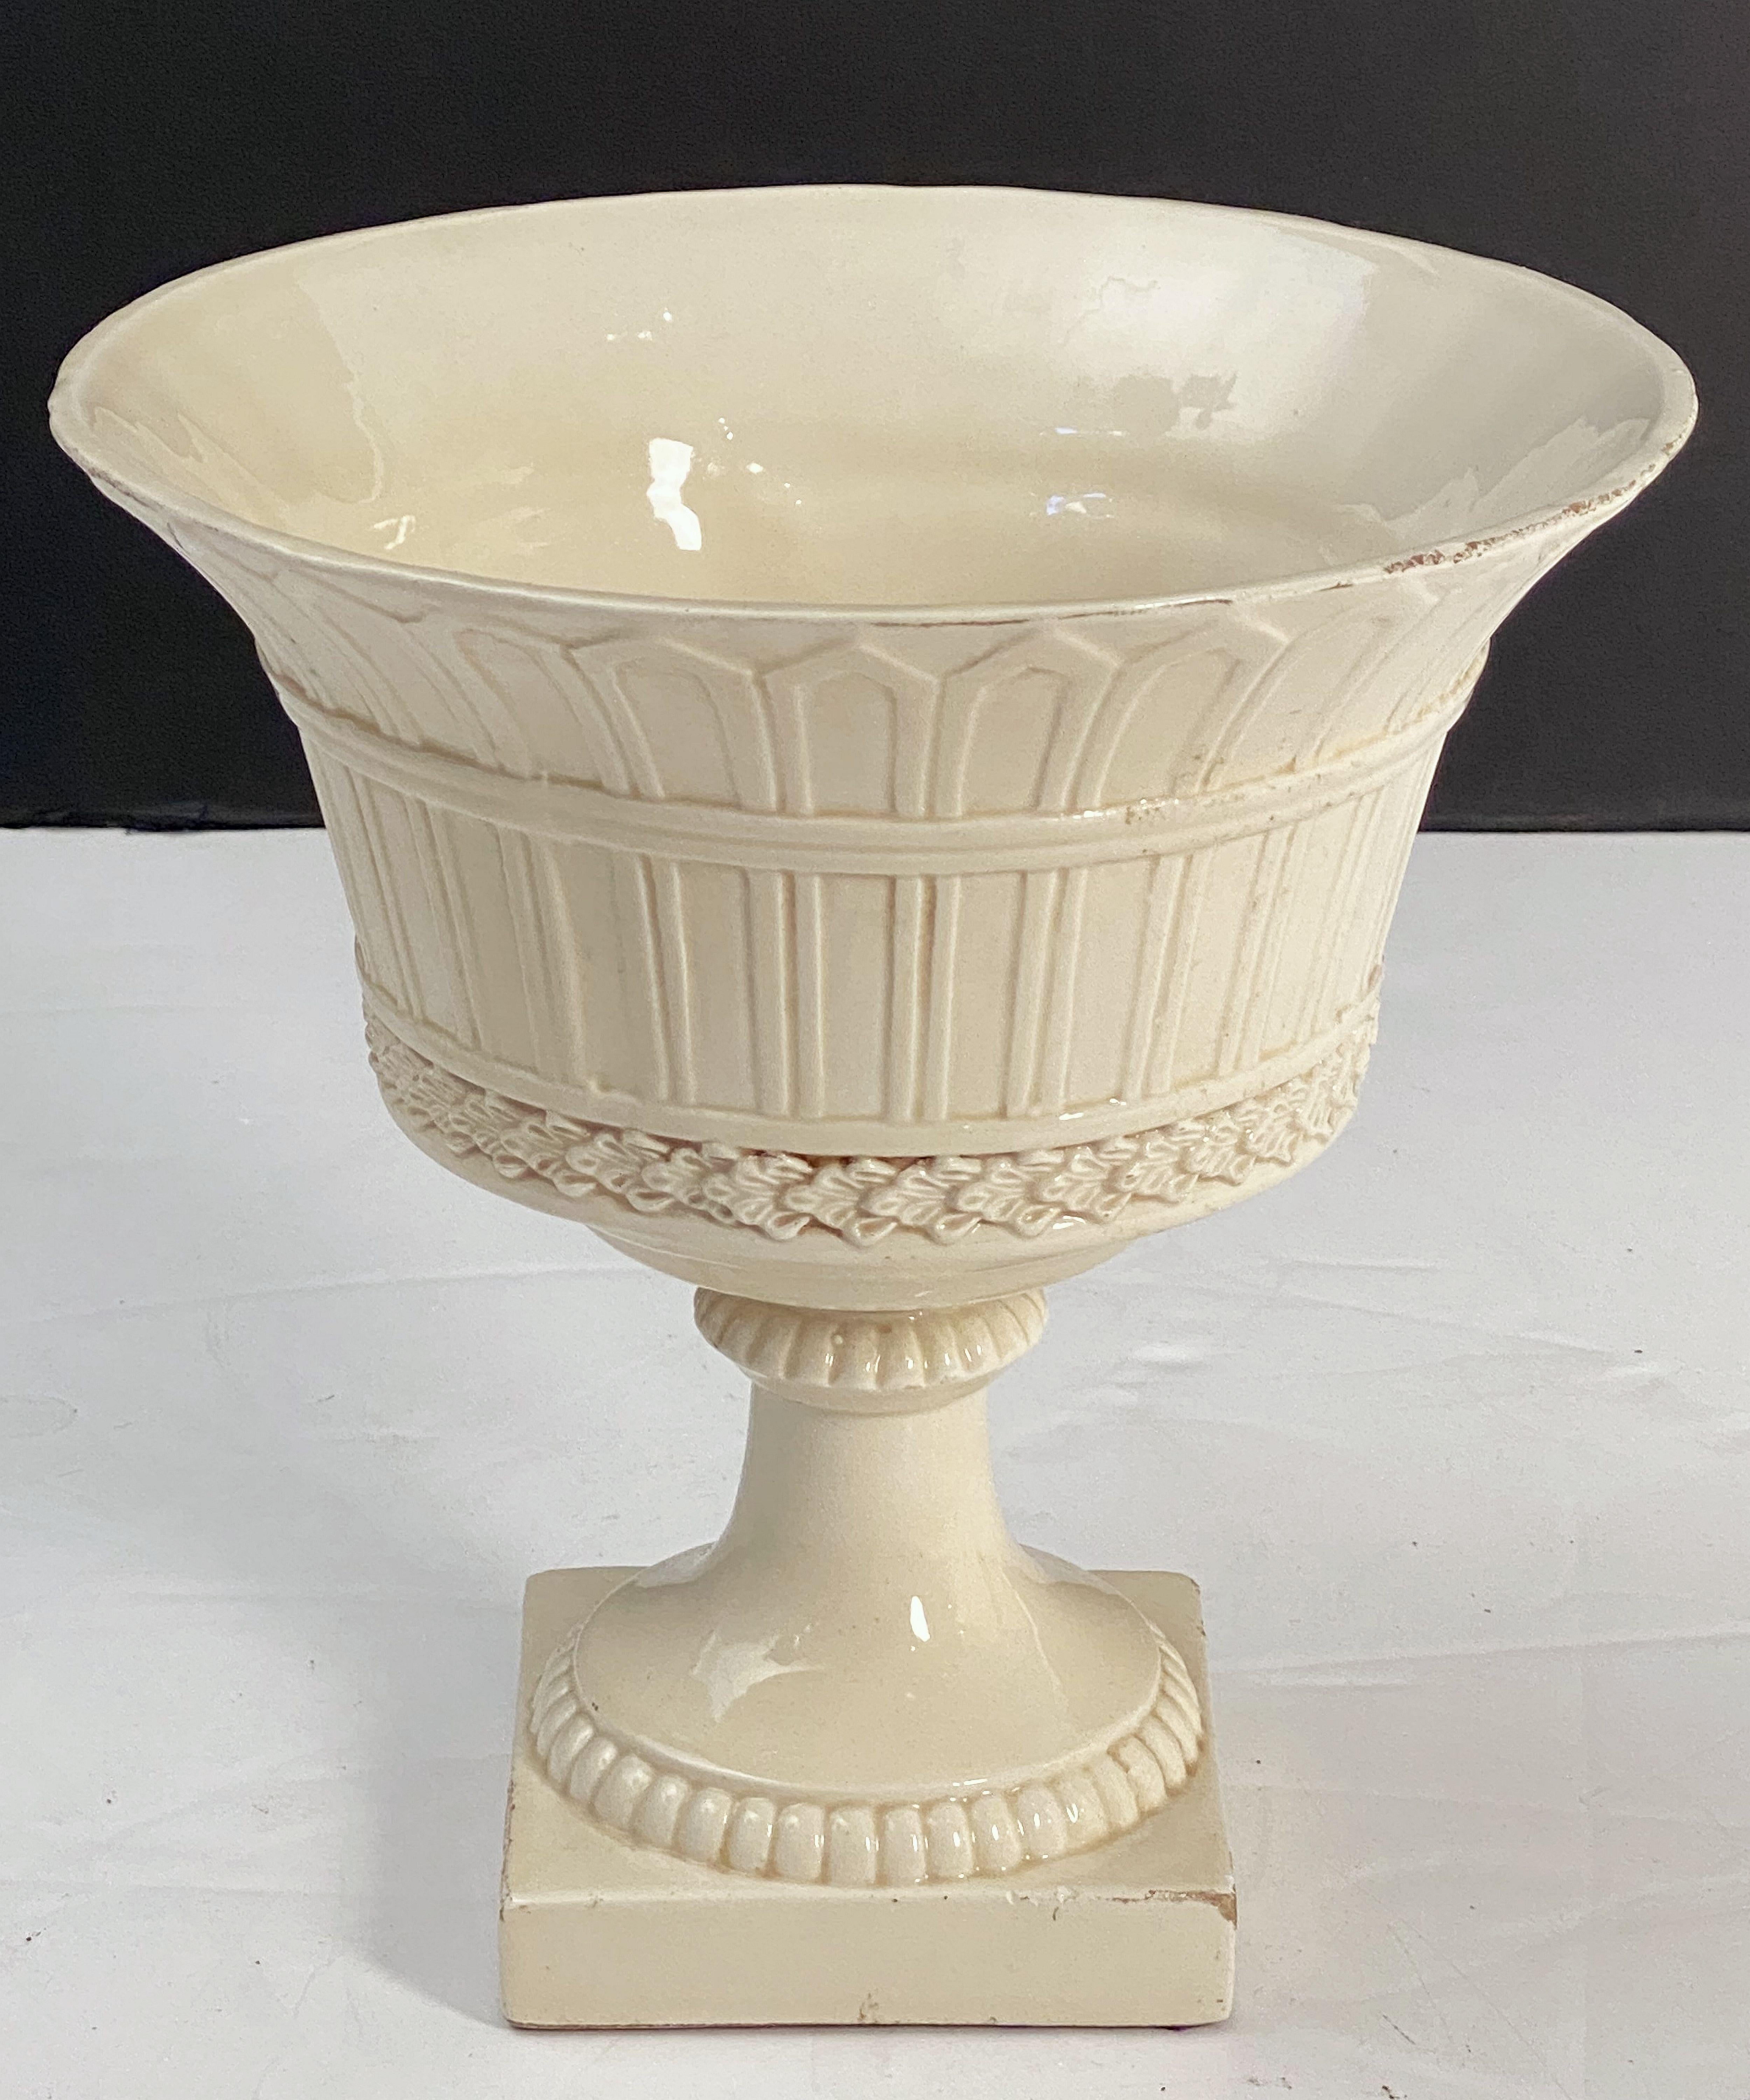 Earthenware Italian Cream Ware or White Glazed Pedestal Bowl with Rose Topiary Top